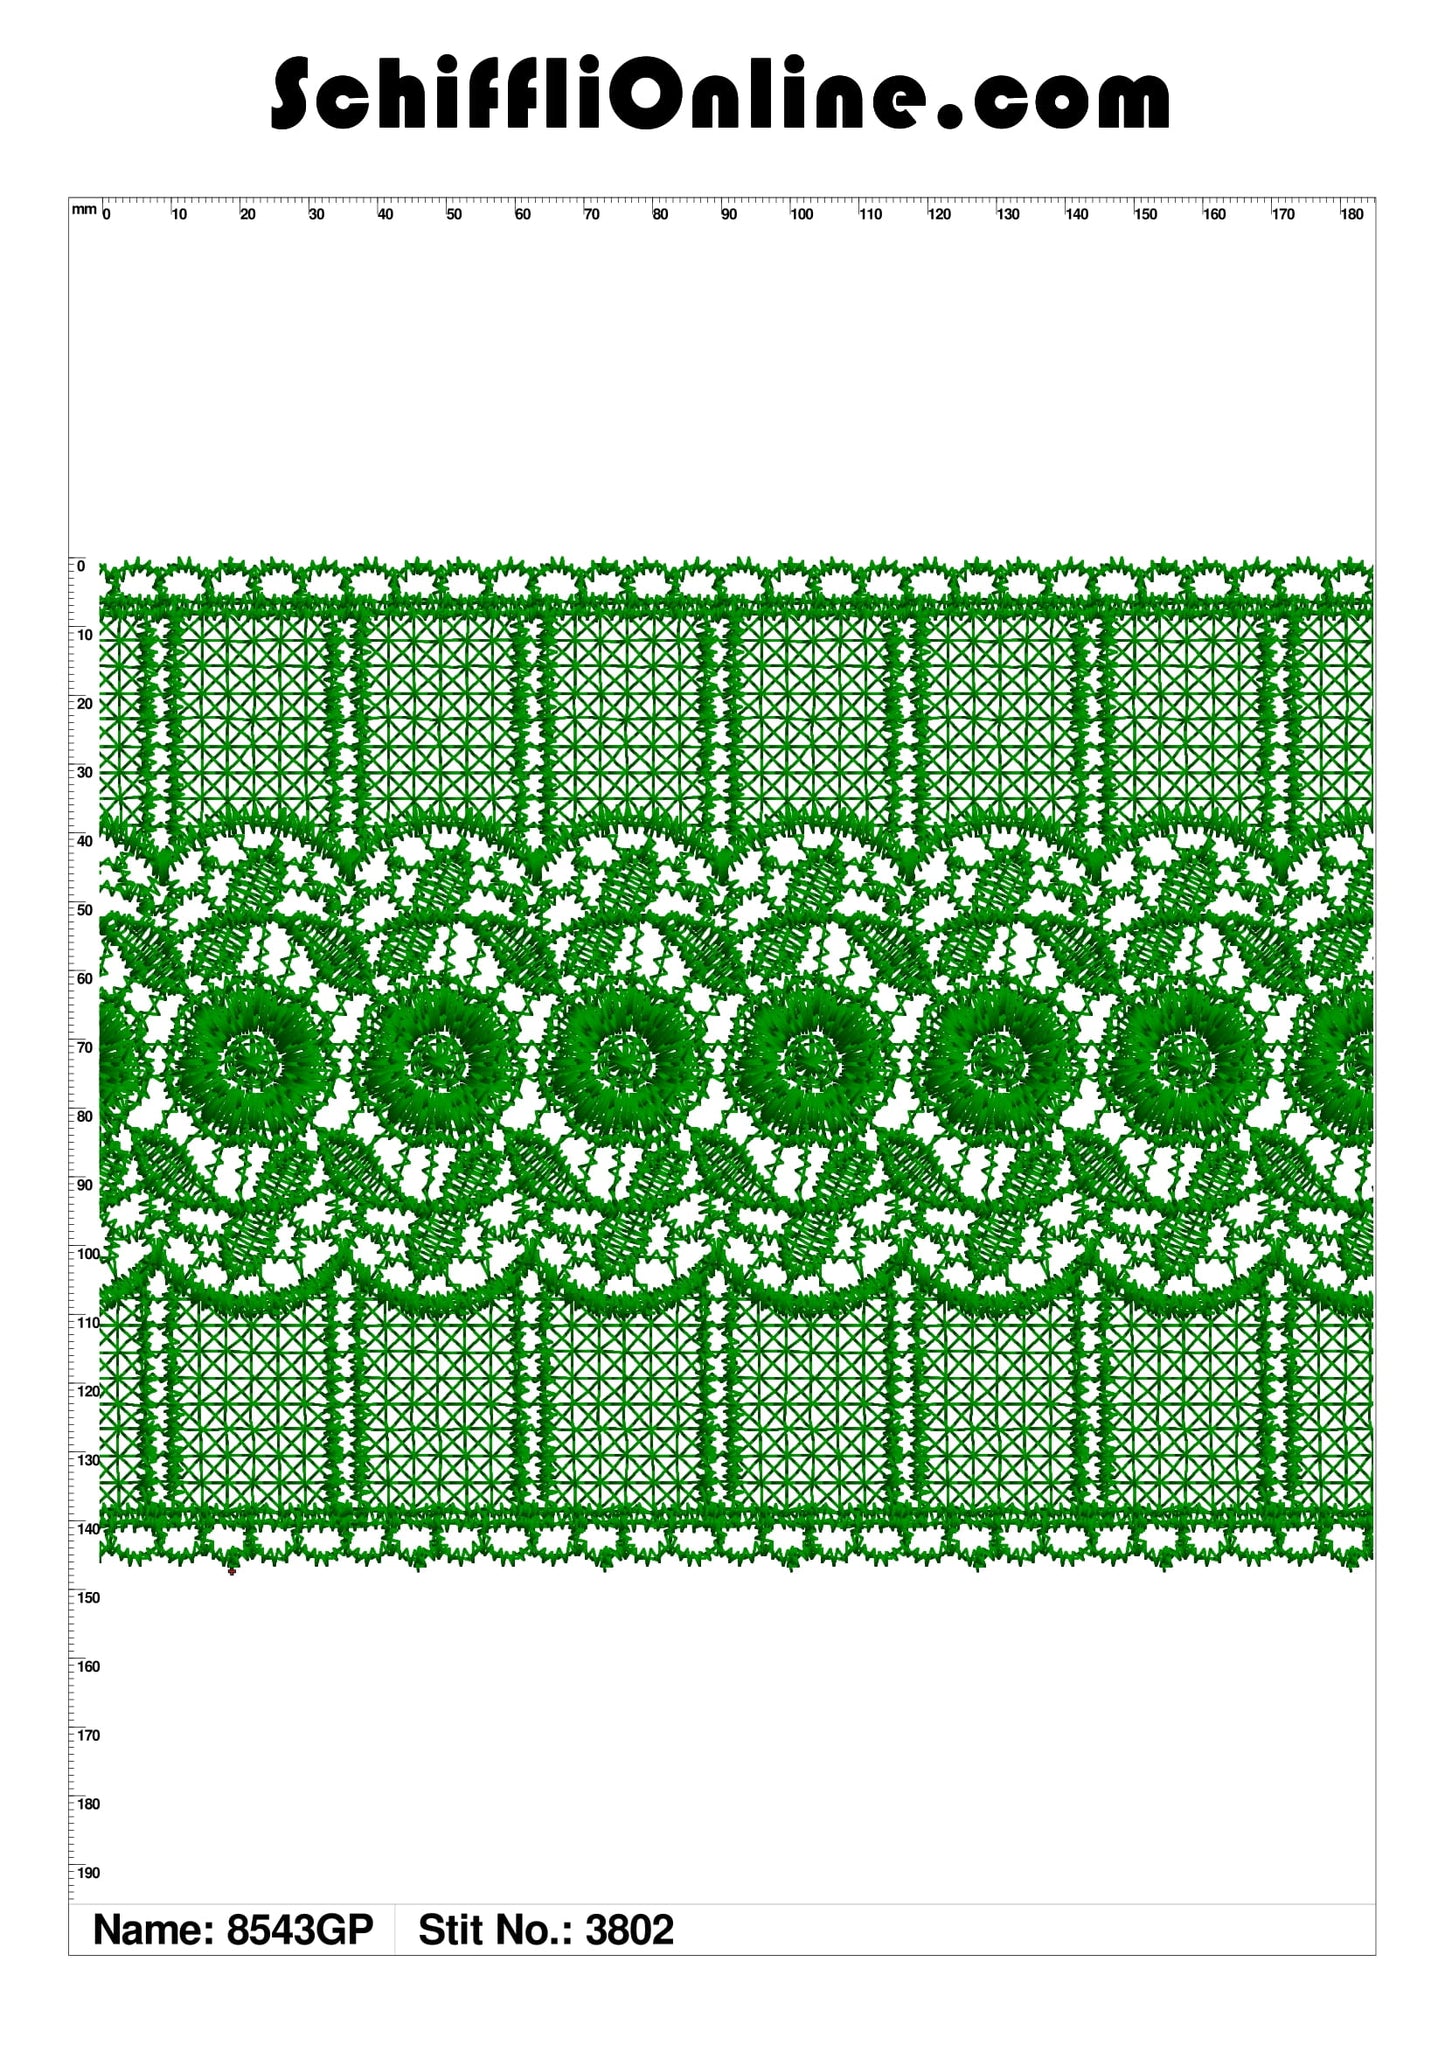 Book 176 CHEMICAL LACE 4X4 50 DESIGNS